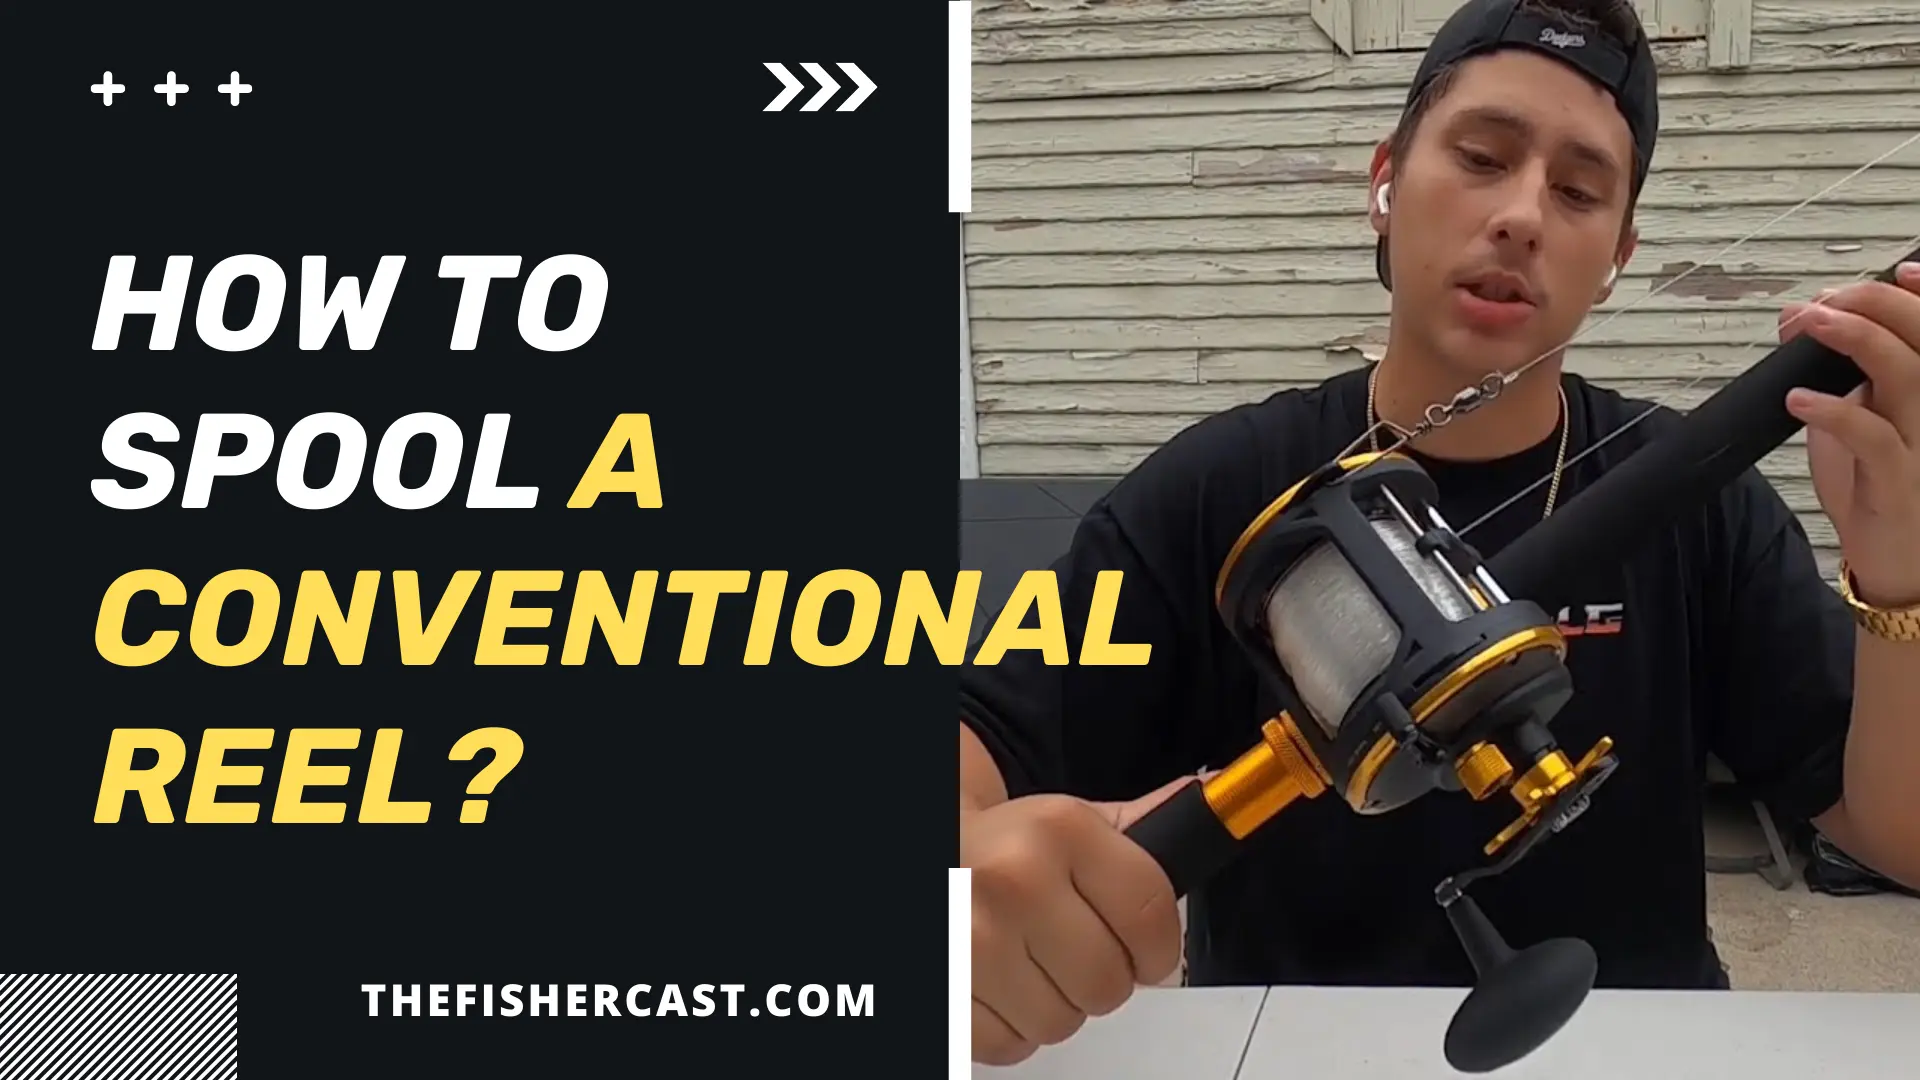 How to Spool a Conventional Reel